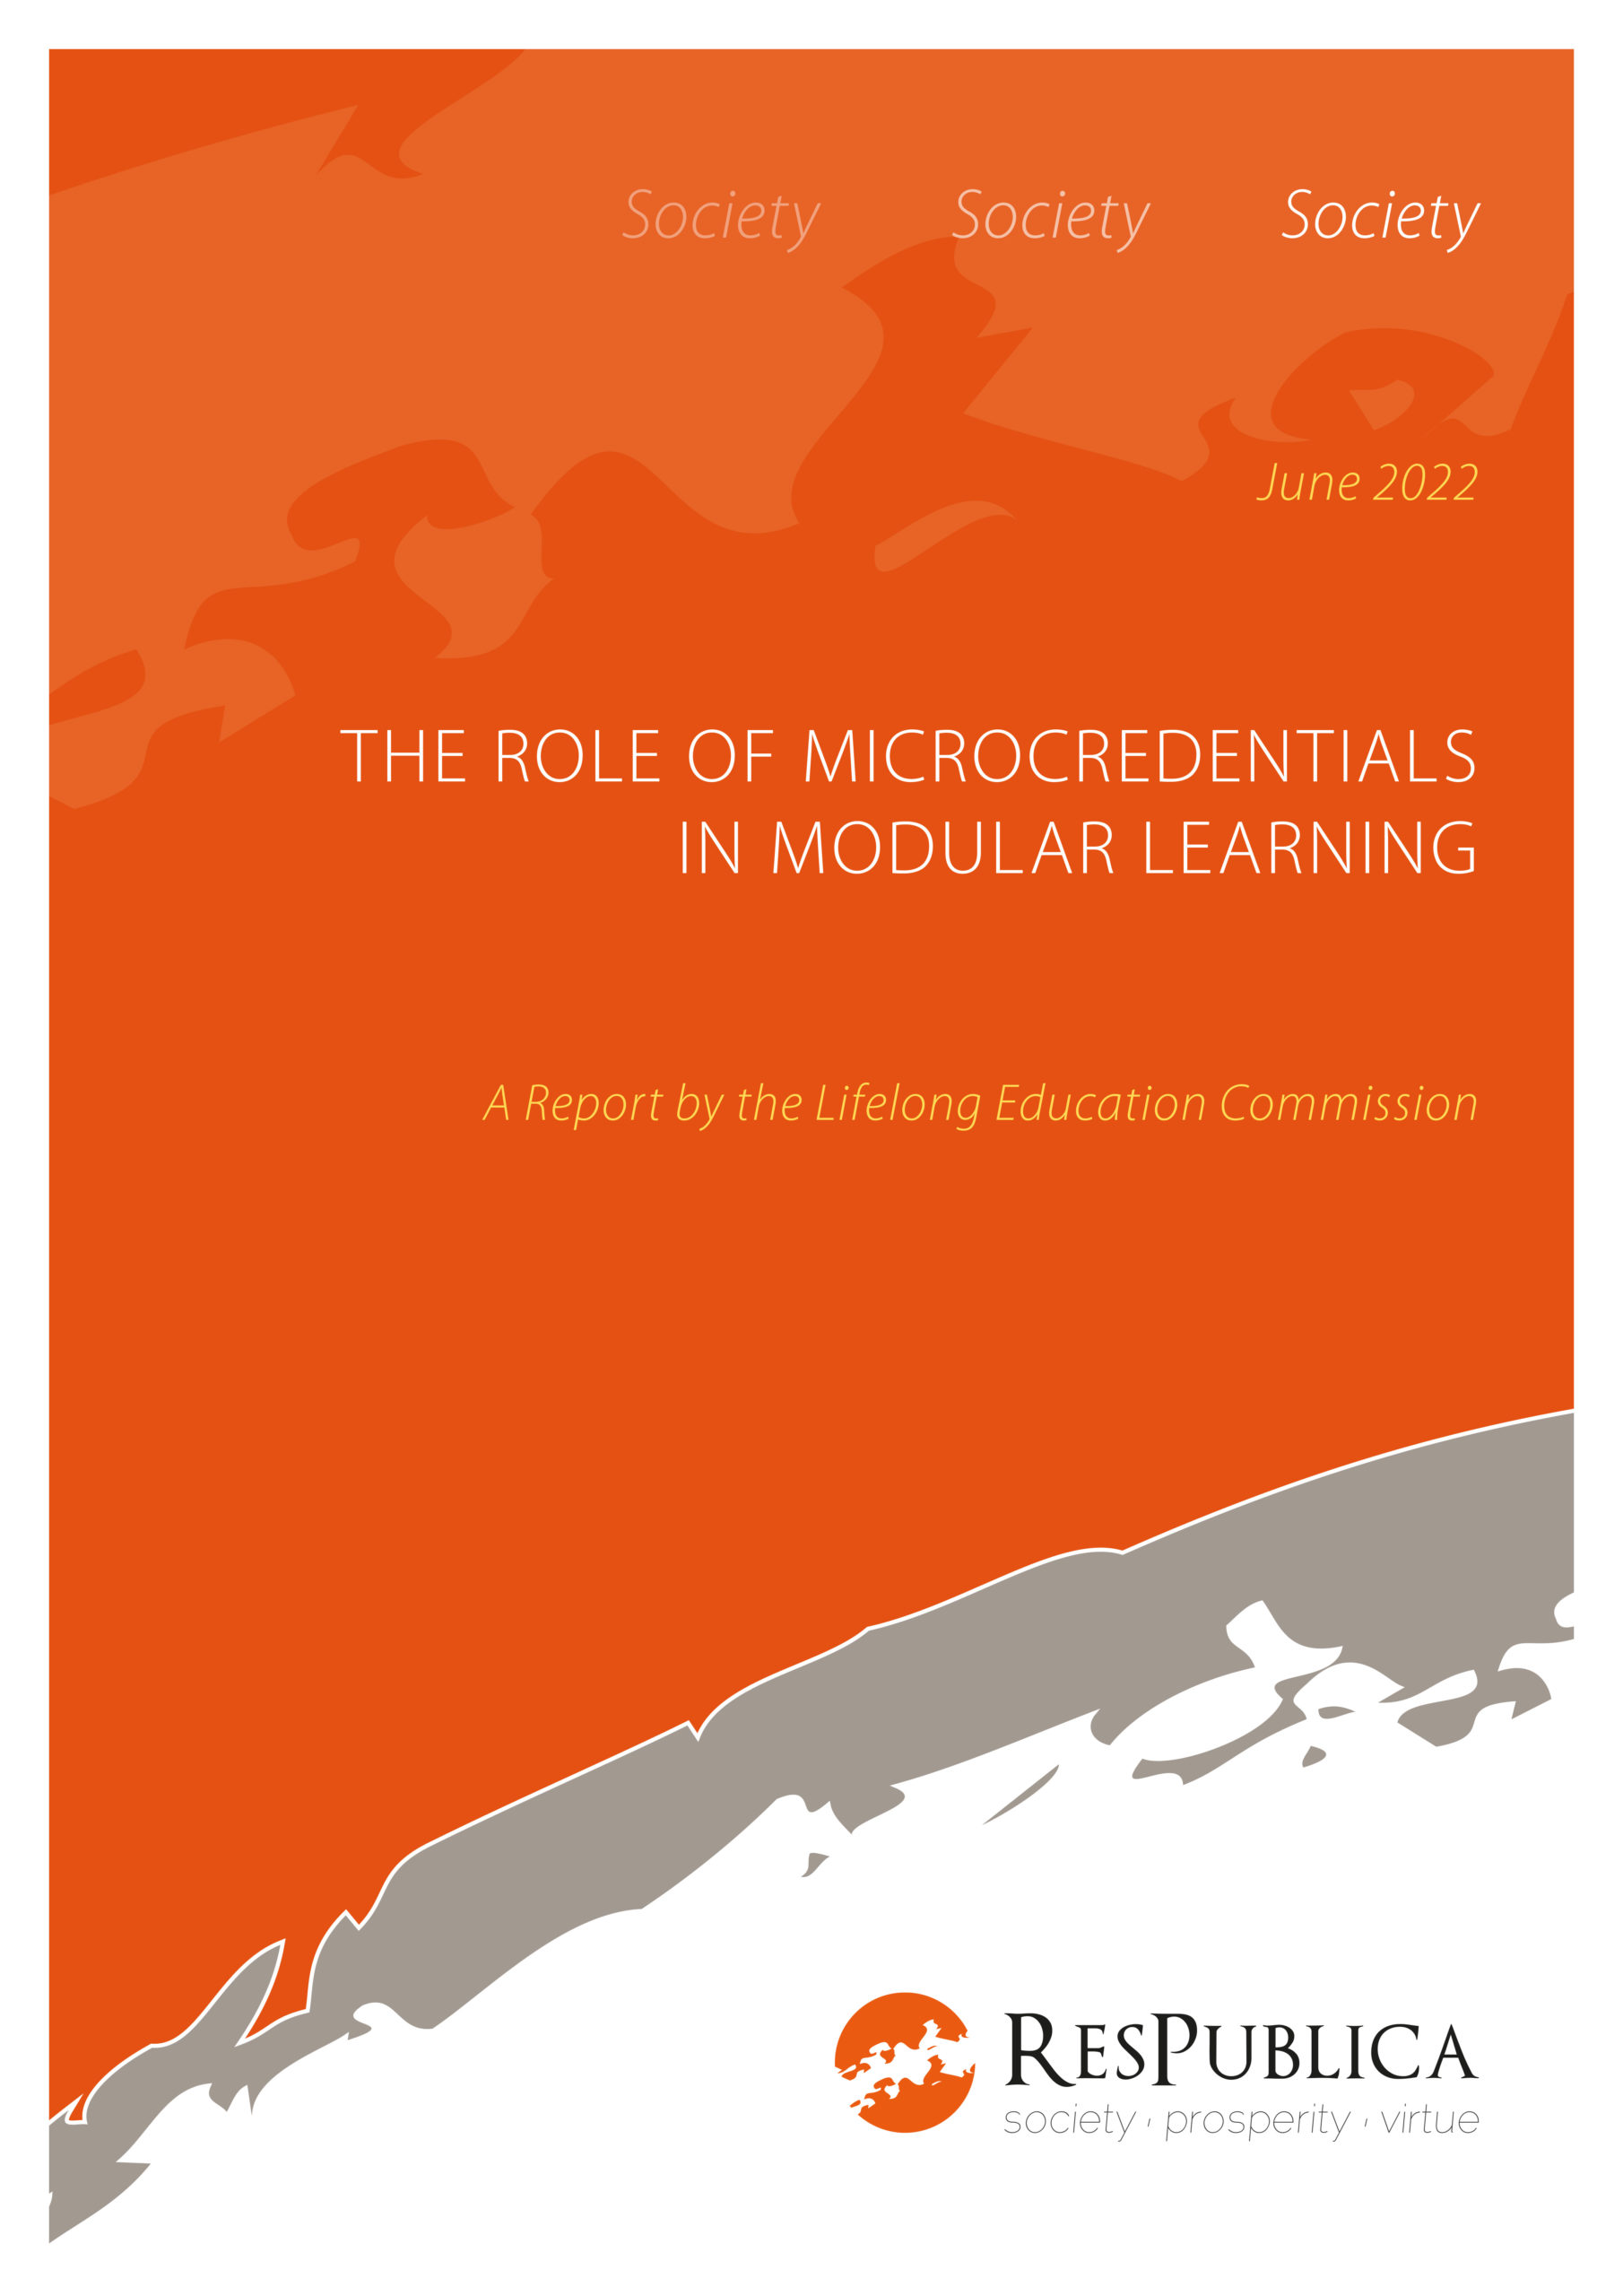 The Role of Microcredentials in Modular Learning